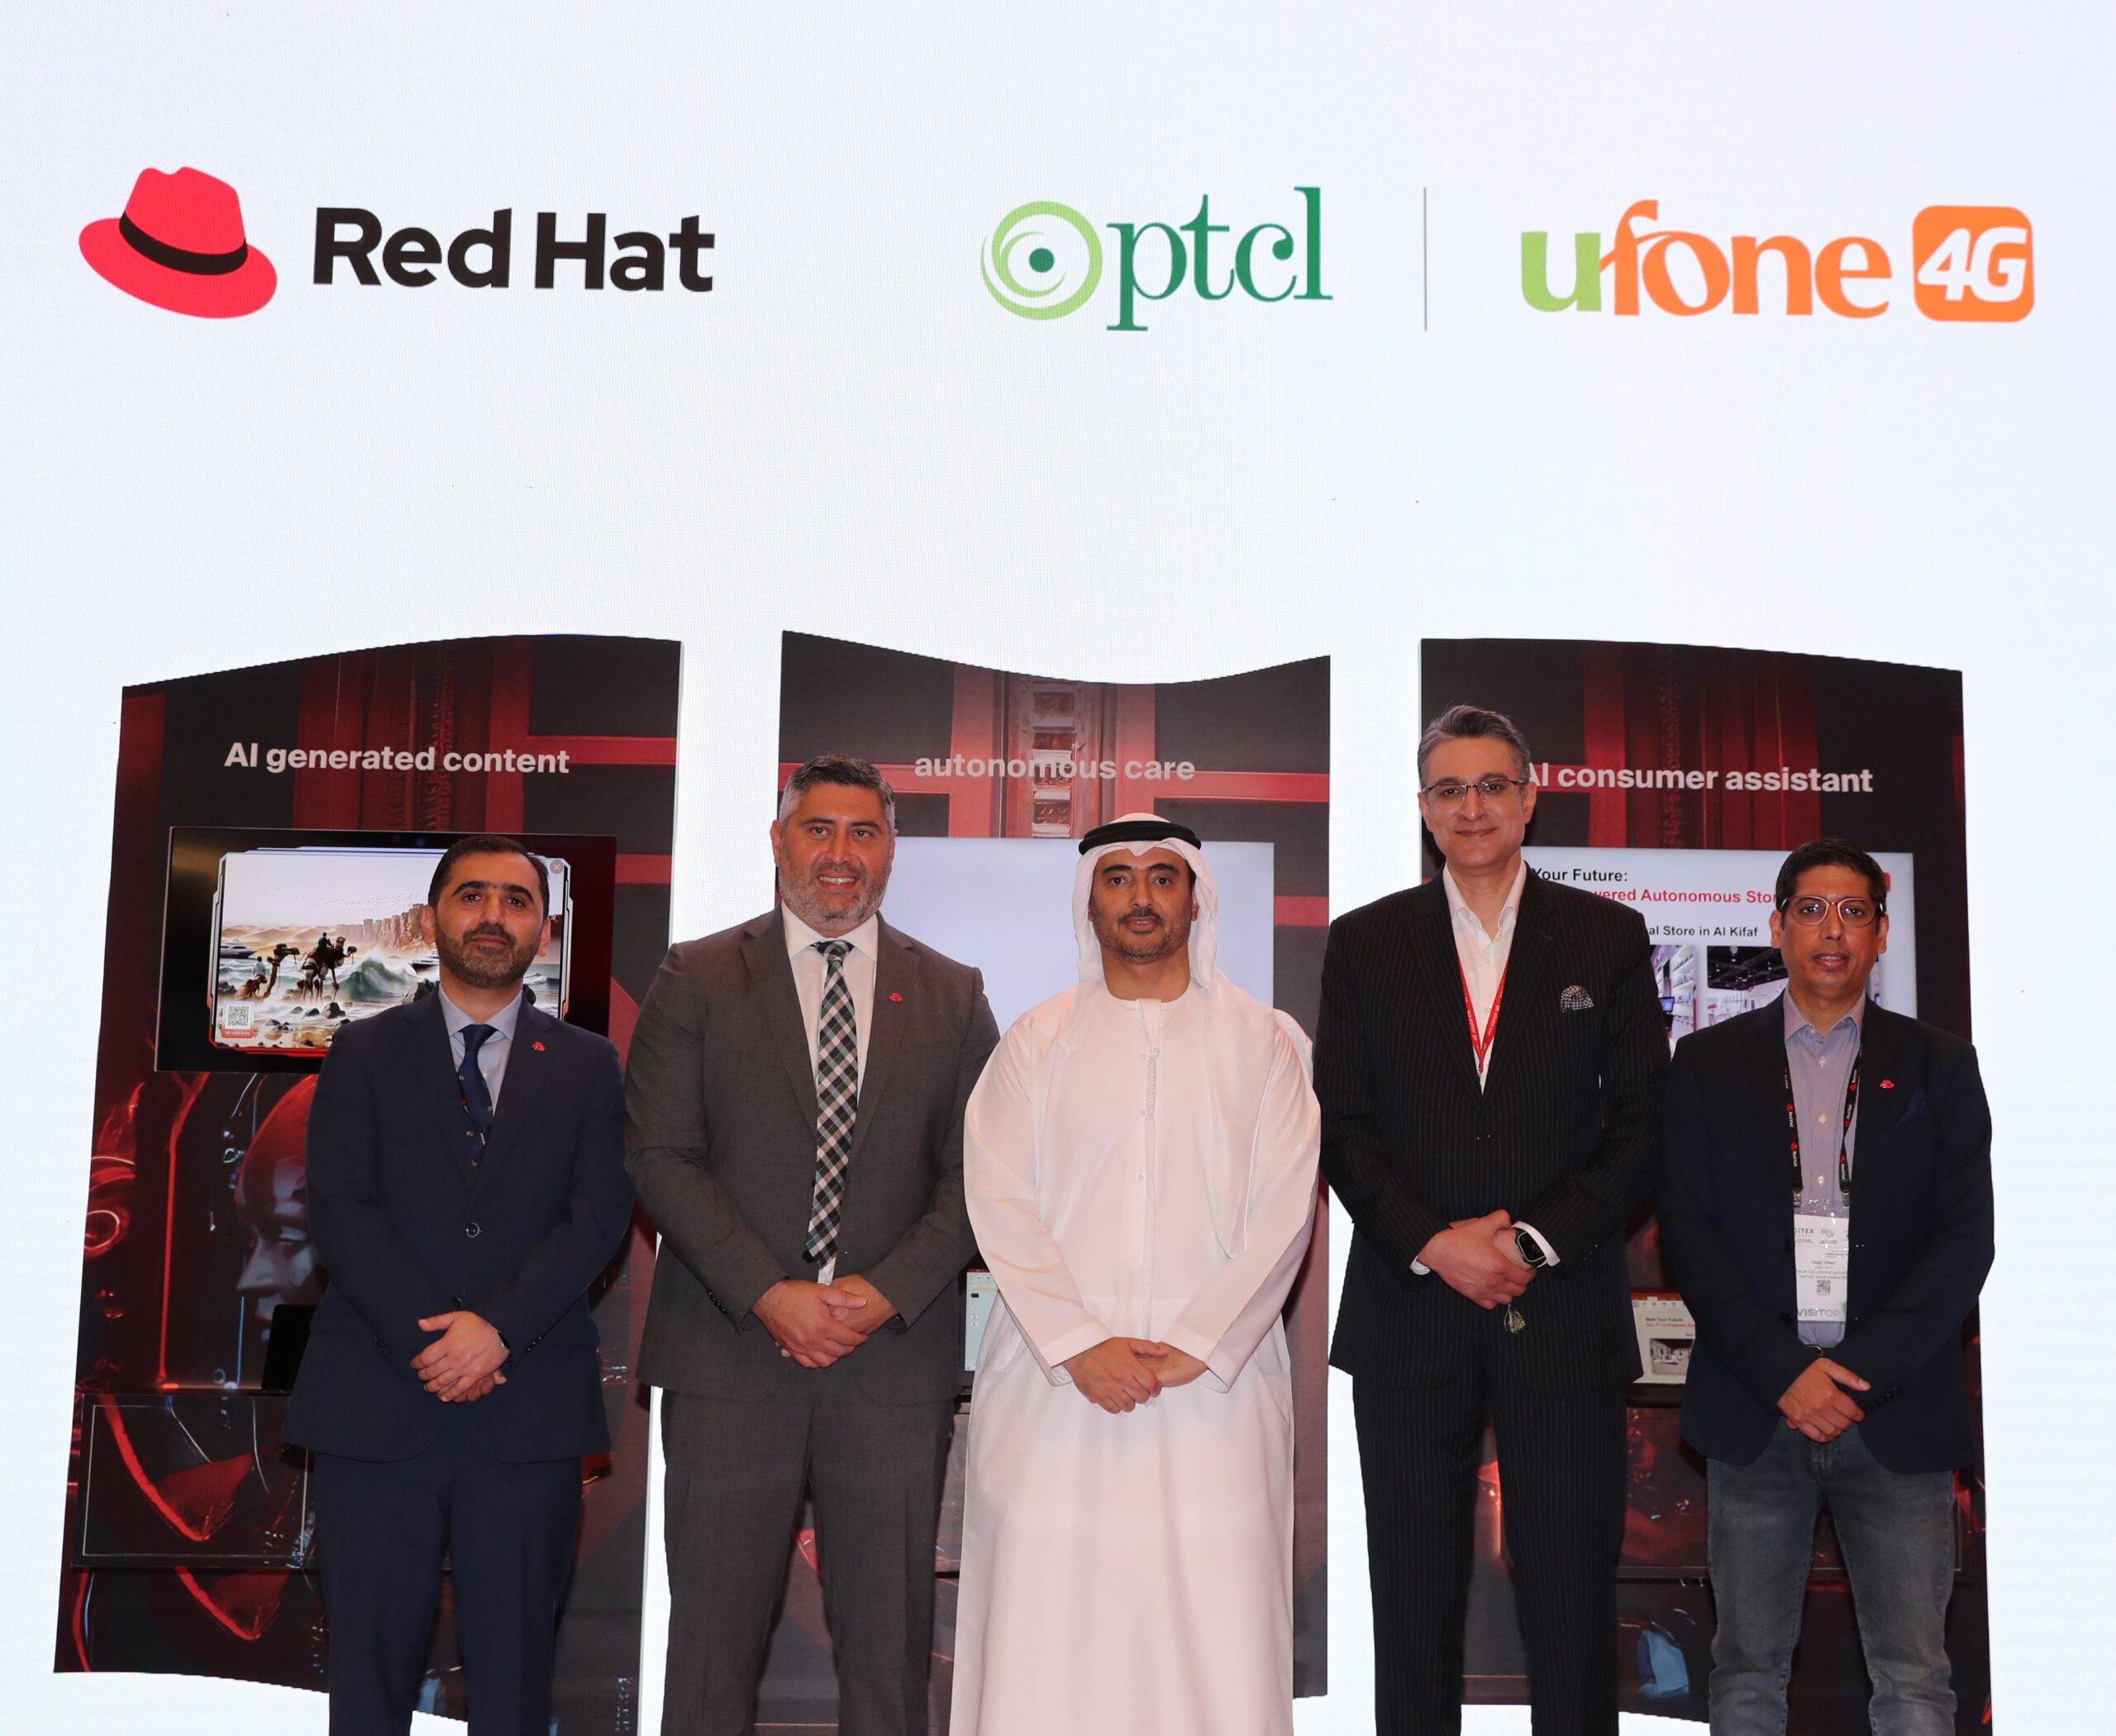 PTCL Group adopts Red Hat hybrid cloud solutions to power digitalization and deliver cloud-native services